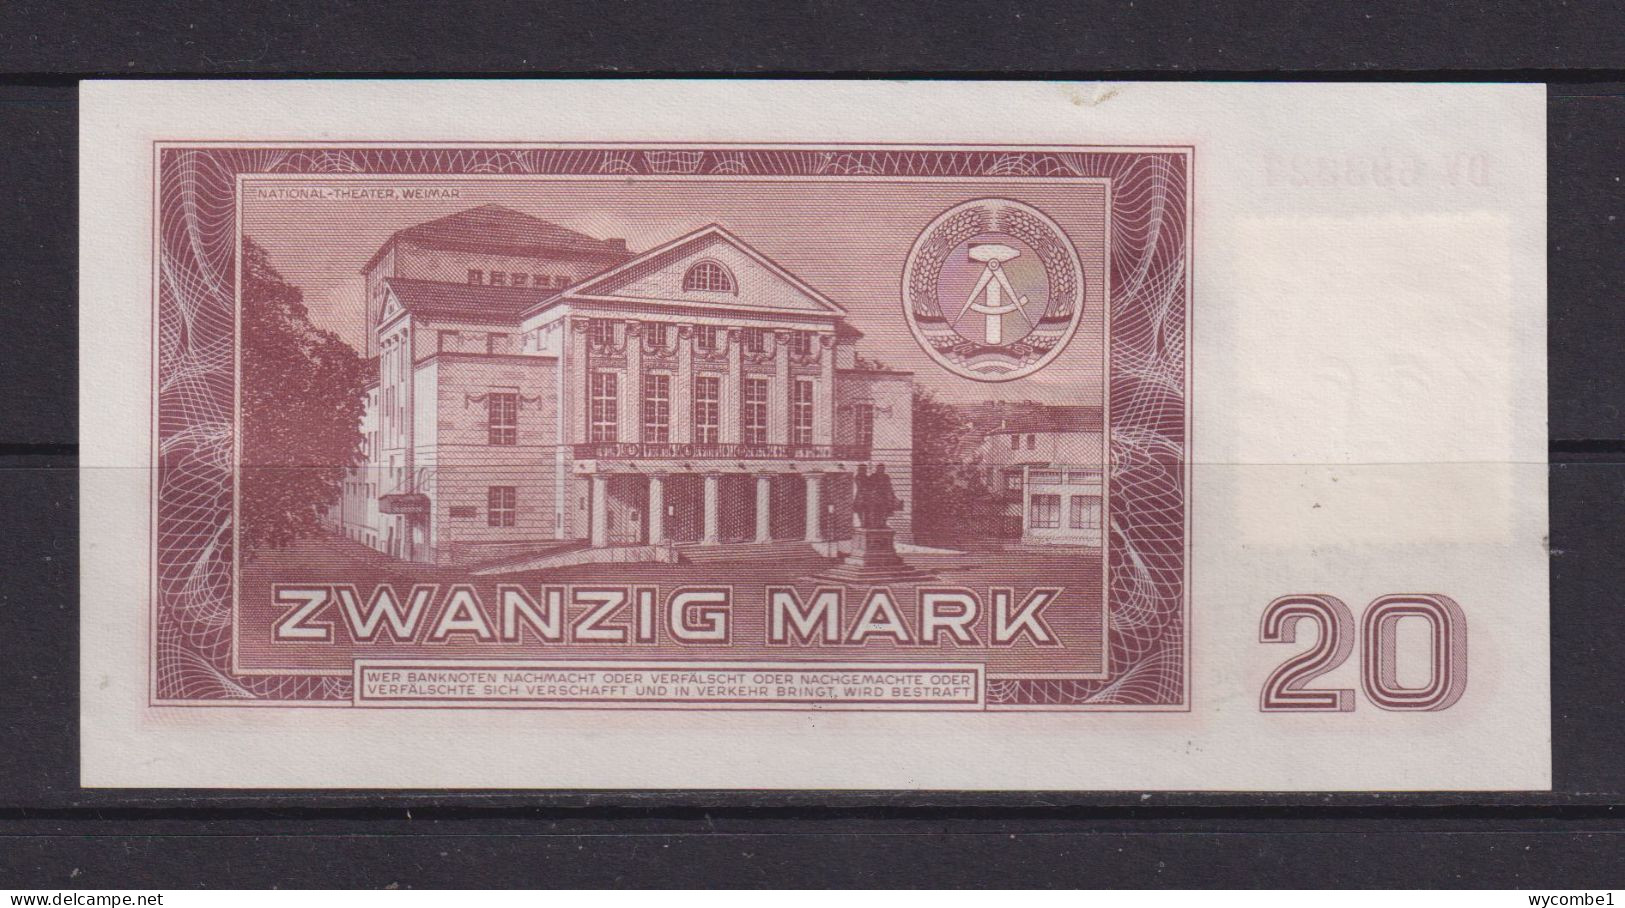 EAST GERMANY - 1964 20 Mark Mozart Commemorative UNC Banknote - [15] Commemoratives & Special Issues